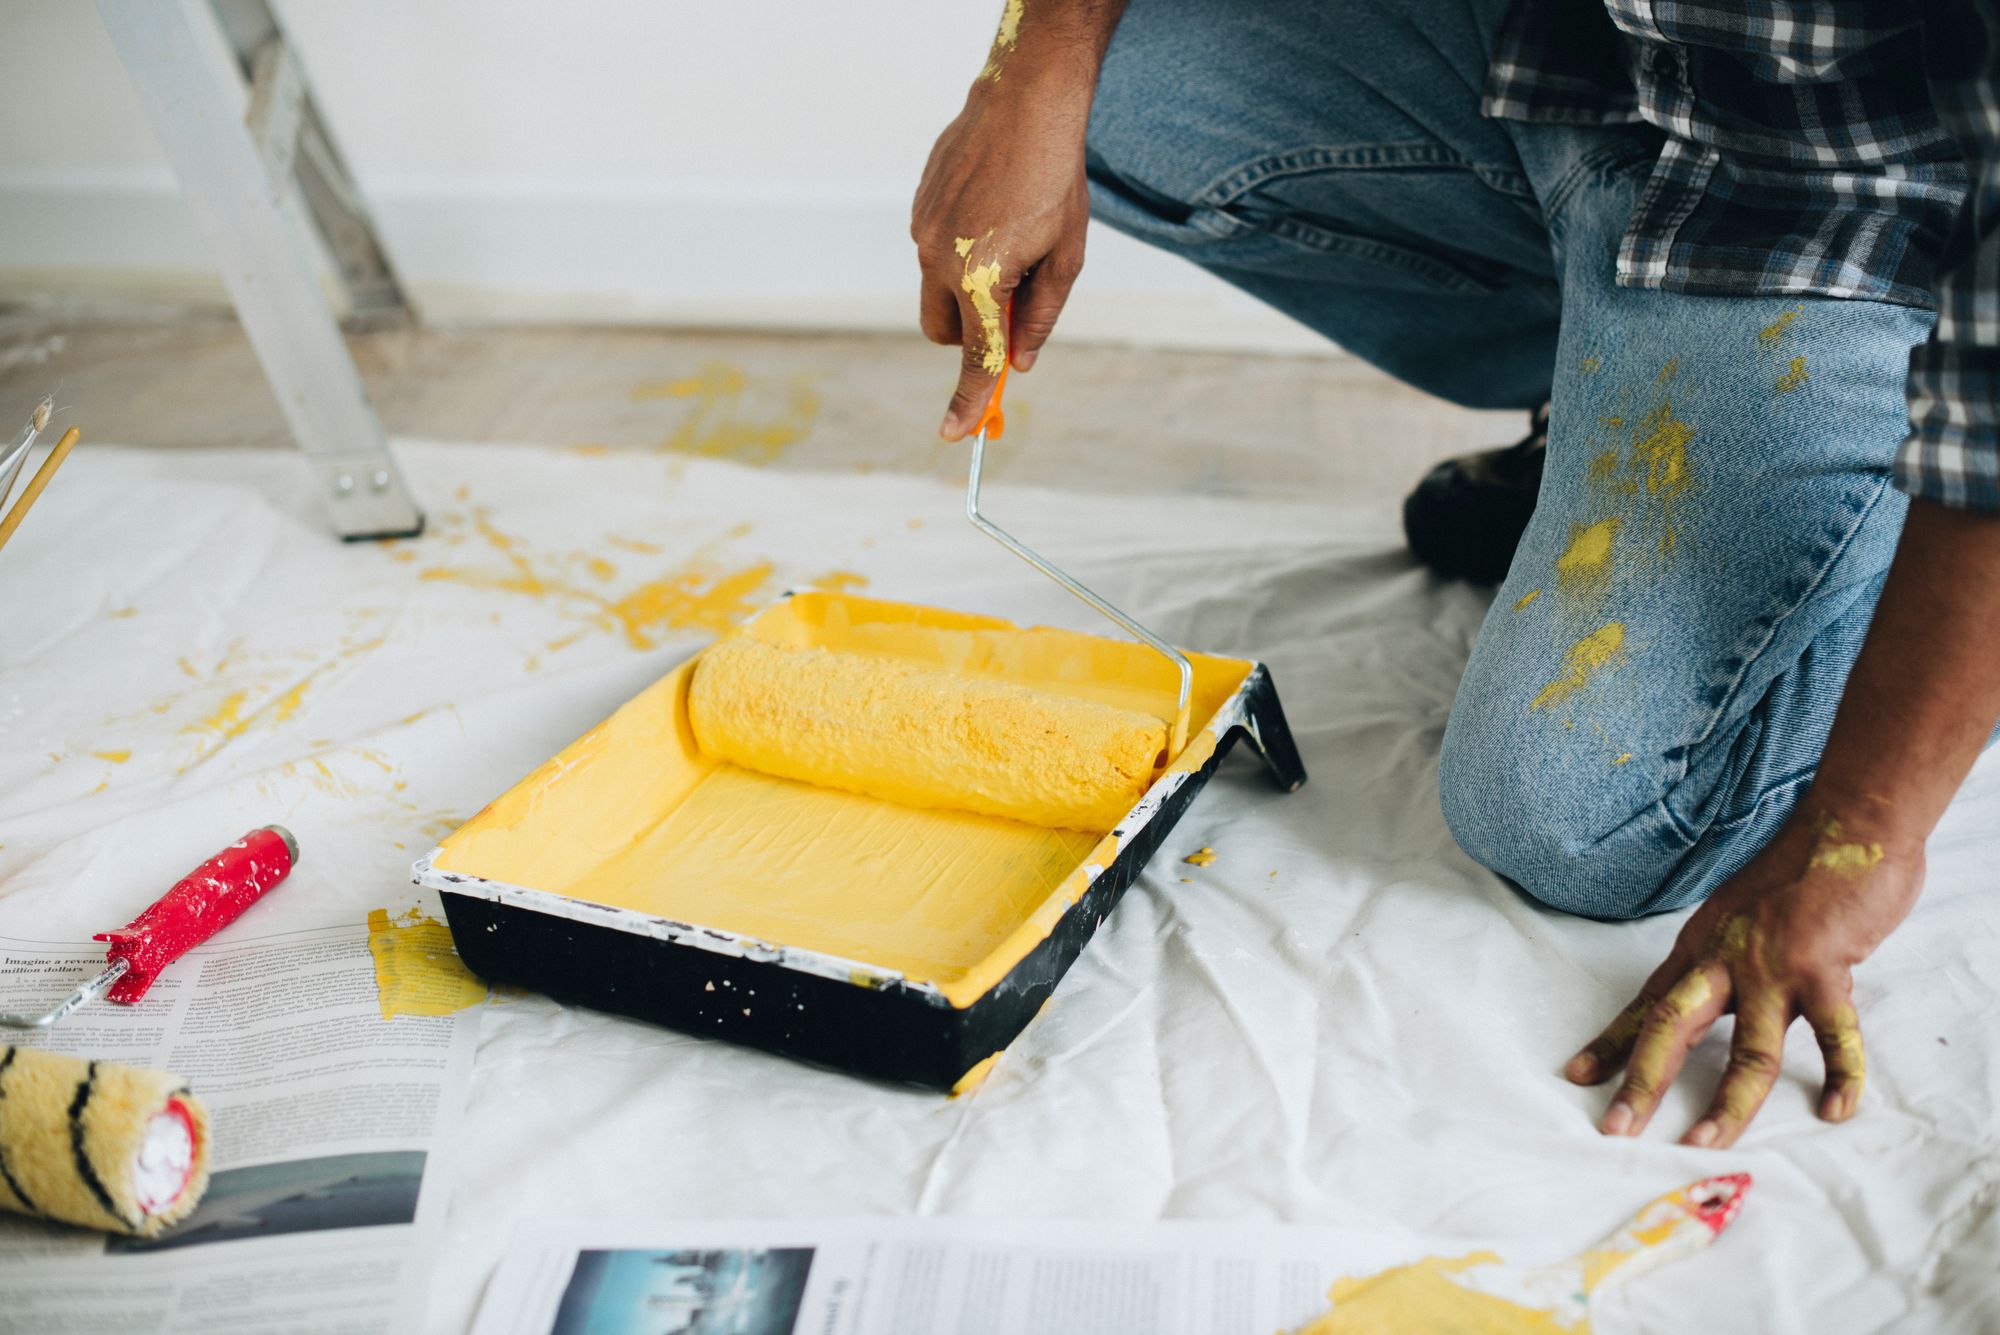 Painting Contracting Career Tips